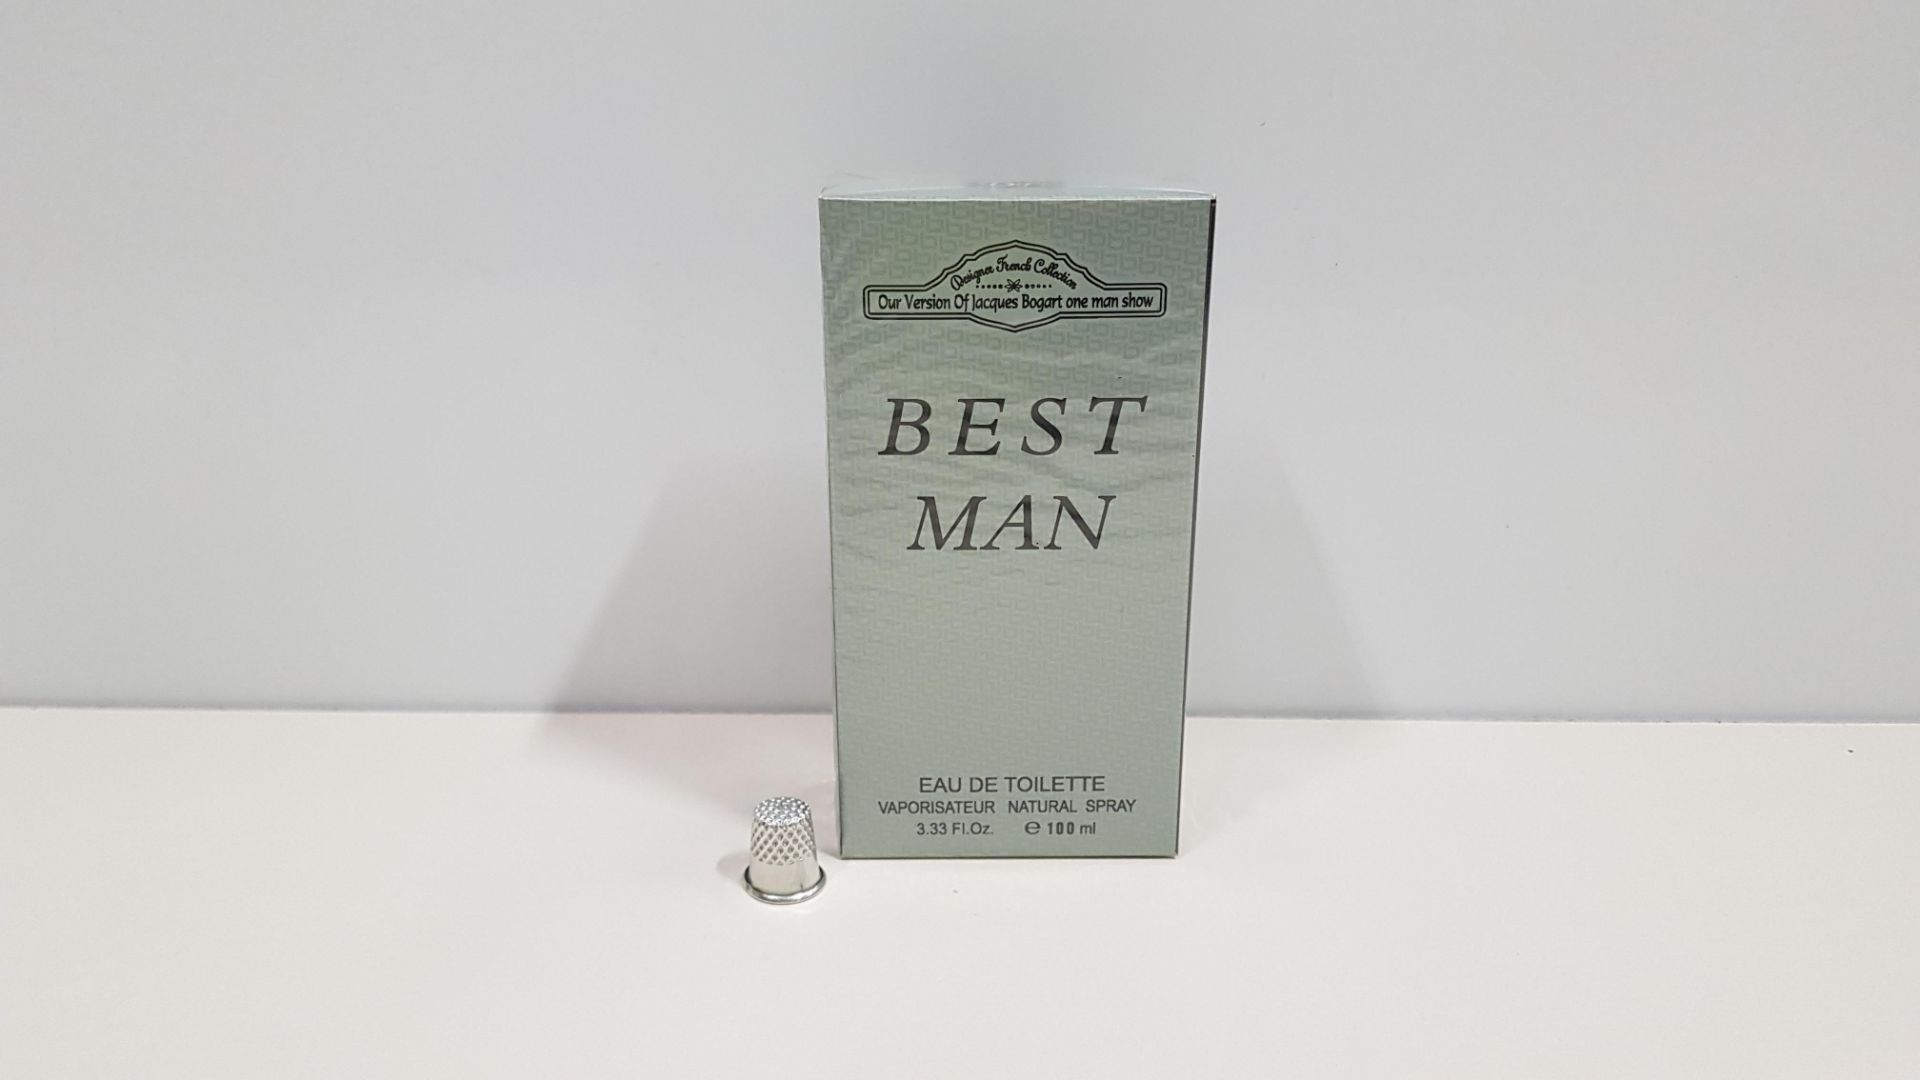 49 X BRAND NEW DESIGNER FRENCH COLLECTION BEST MAN EAU DE TOILETTE 100ML 3.33FLO.OZ. (IN ONE BOX AND